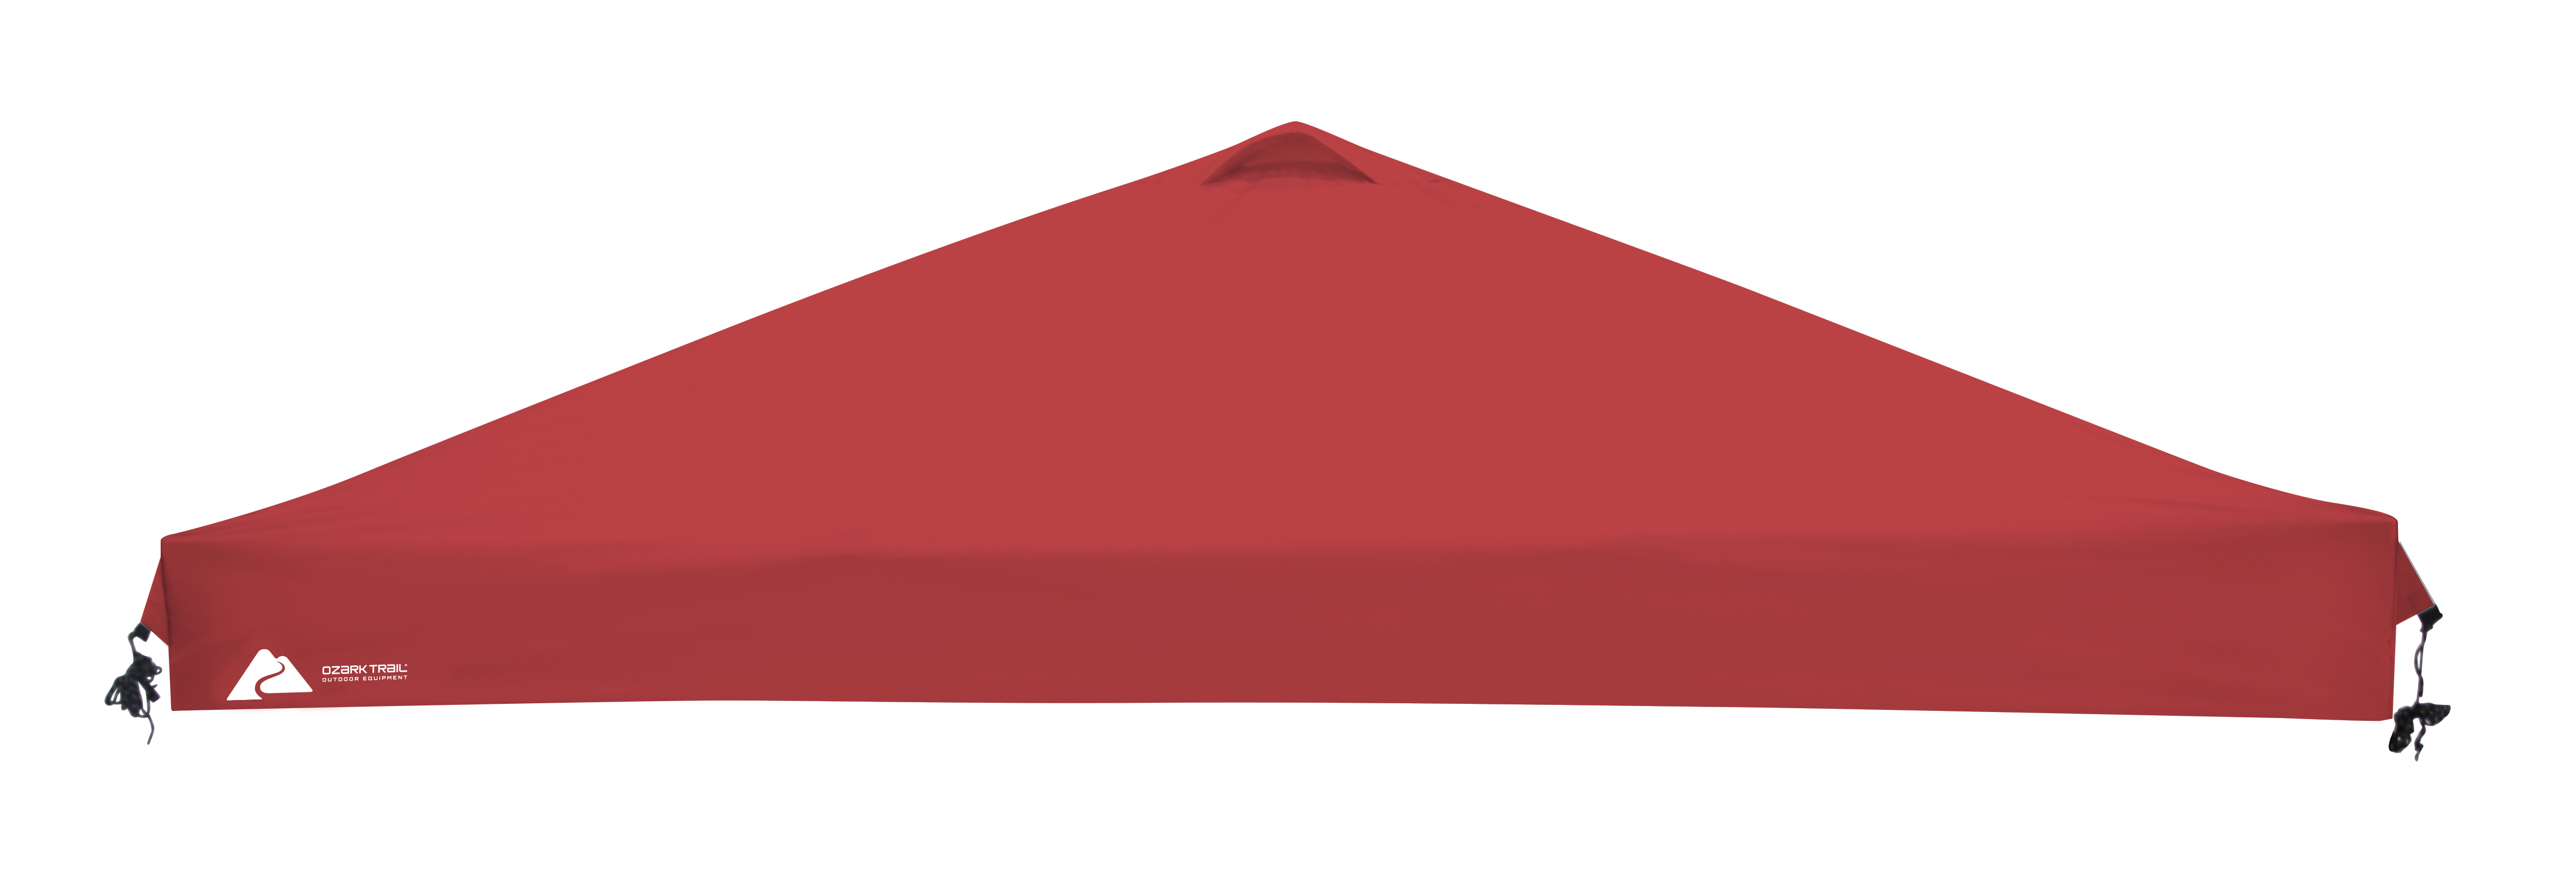 Ozark Trail 10' x 10' Top Replacement Cover for outdoor canopy, Red - image 1 of 7